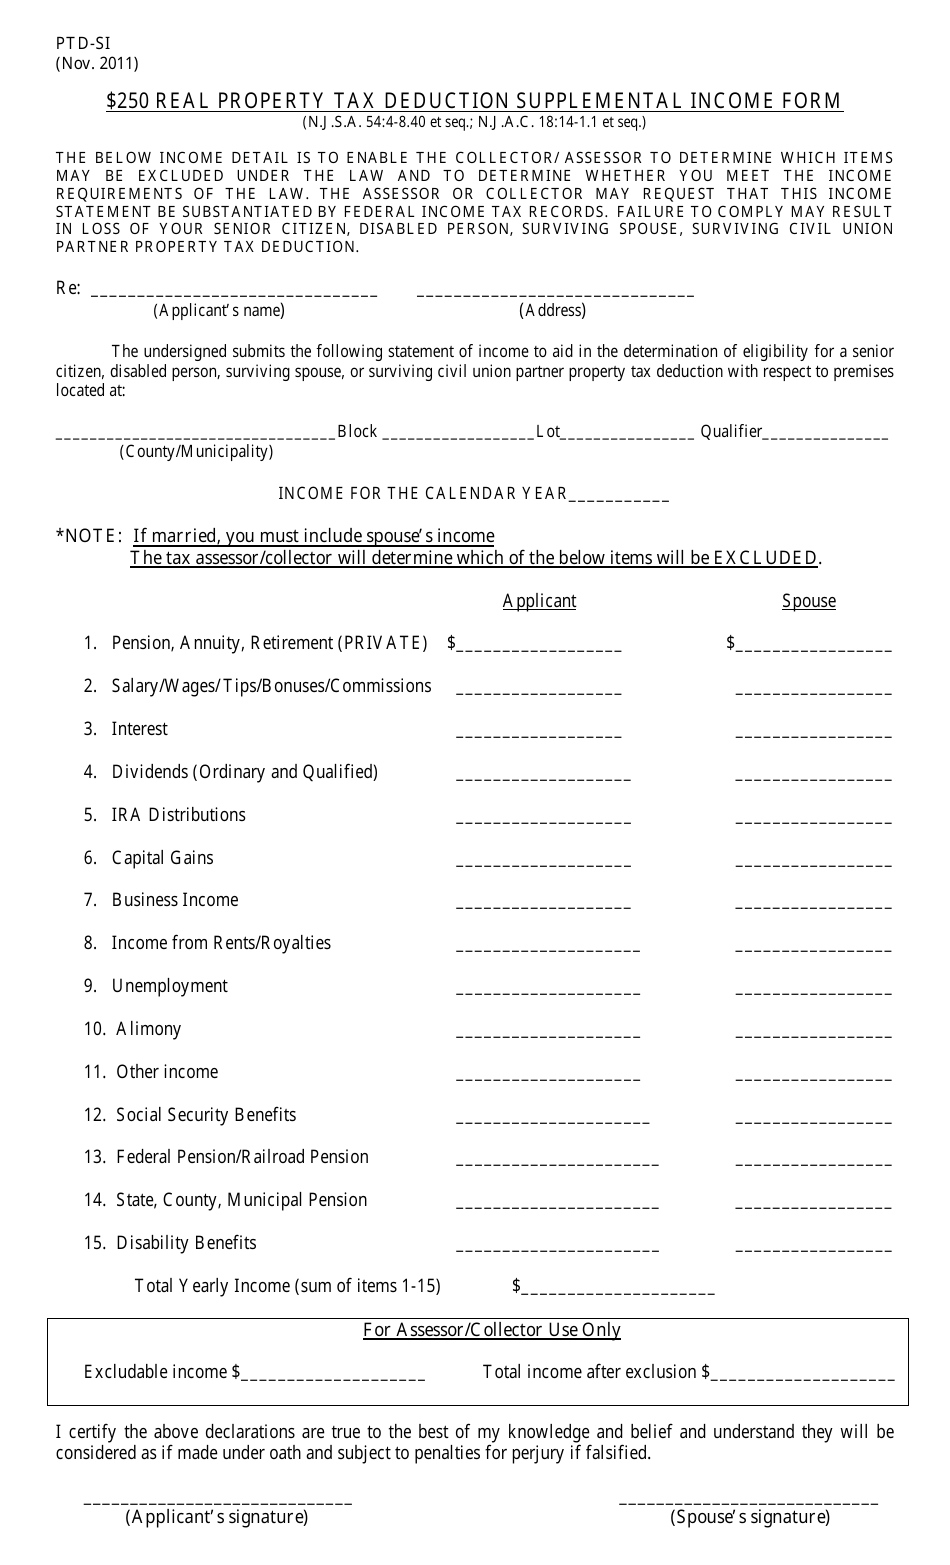 form-ptd-si-download-fillable-pdf-or-fill-online-250-real-property-tax